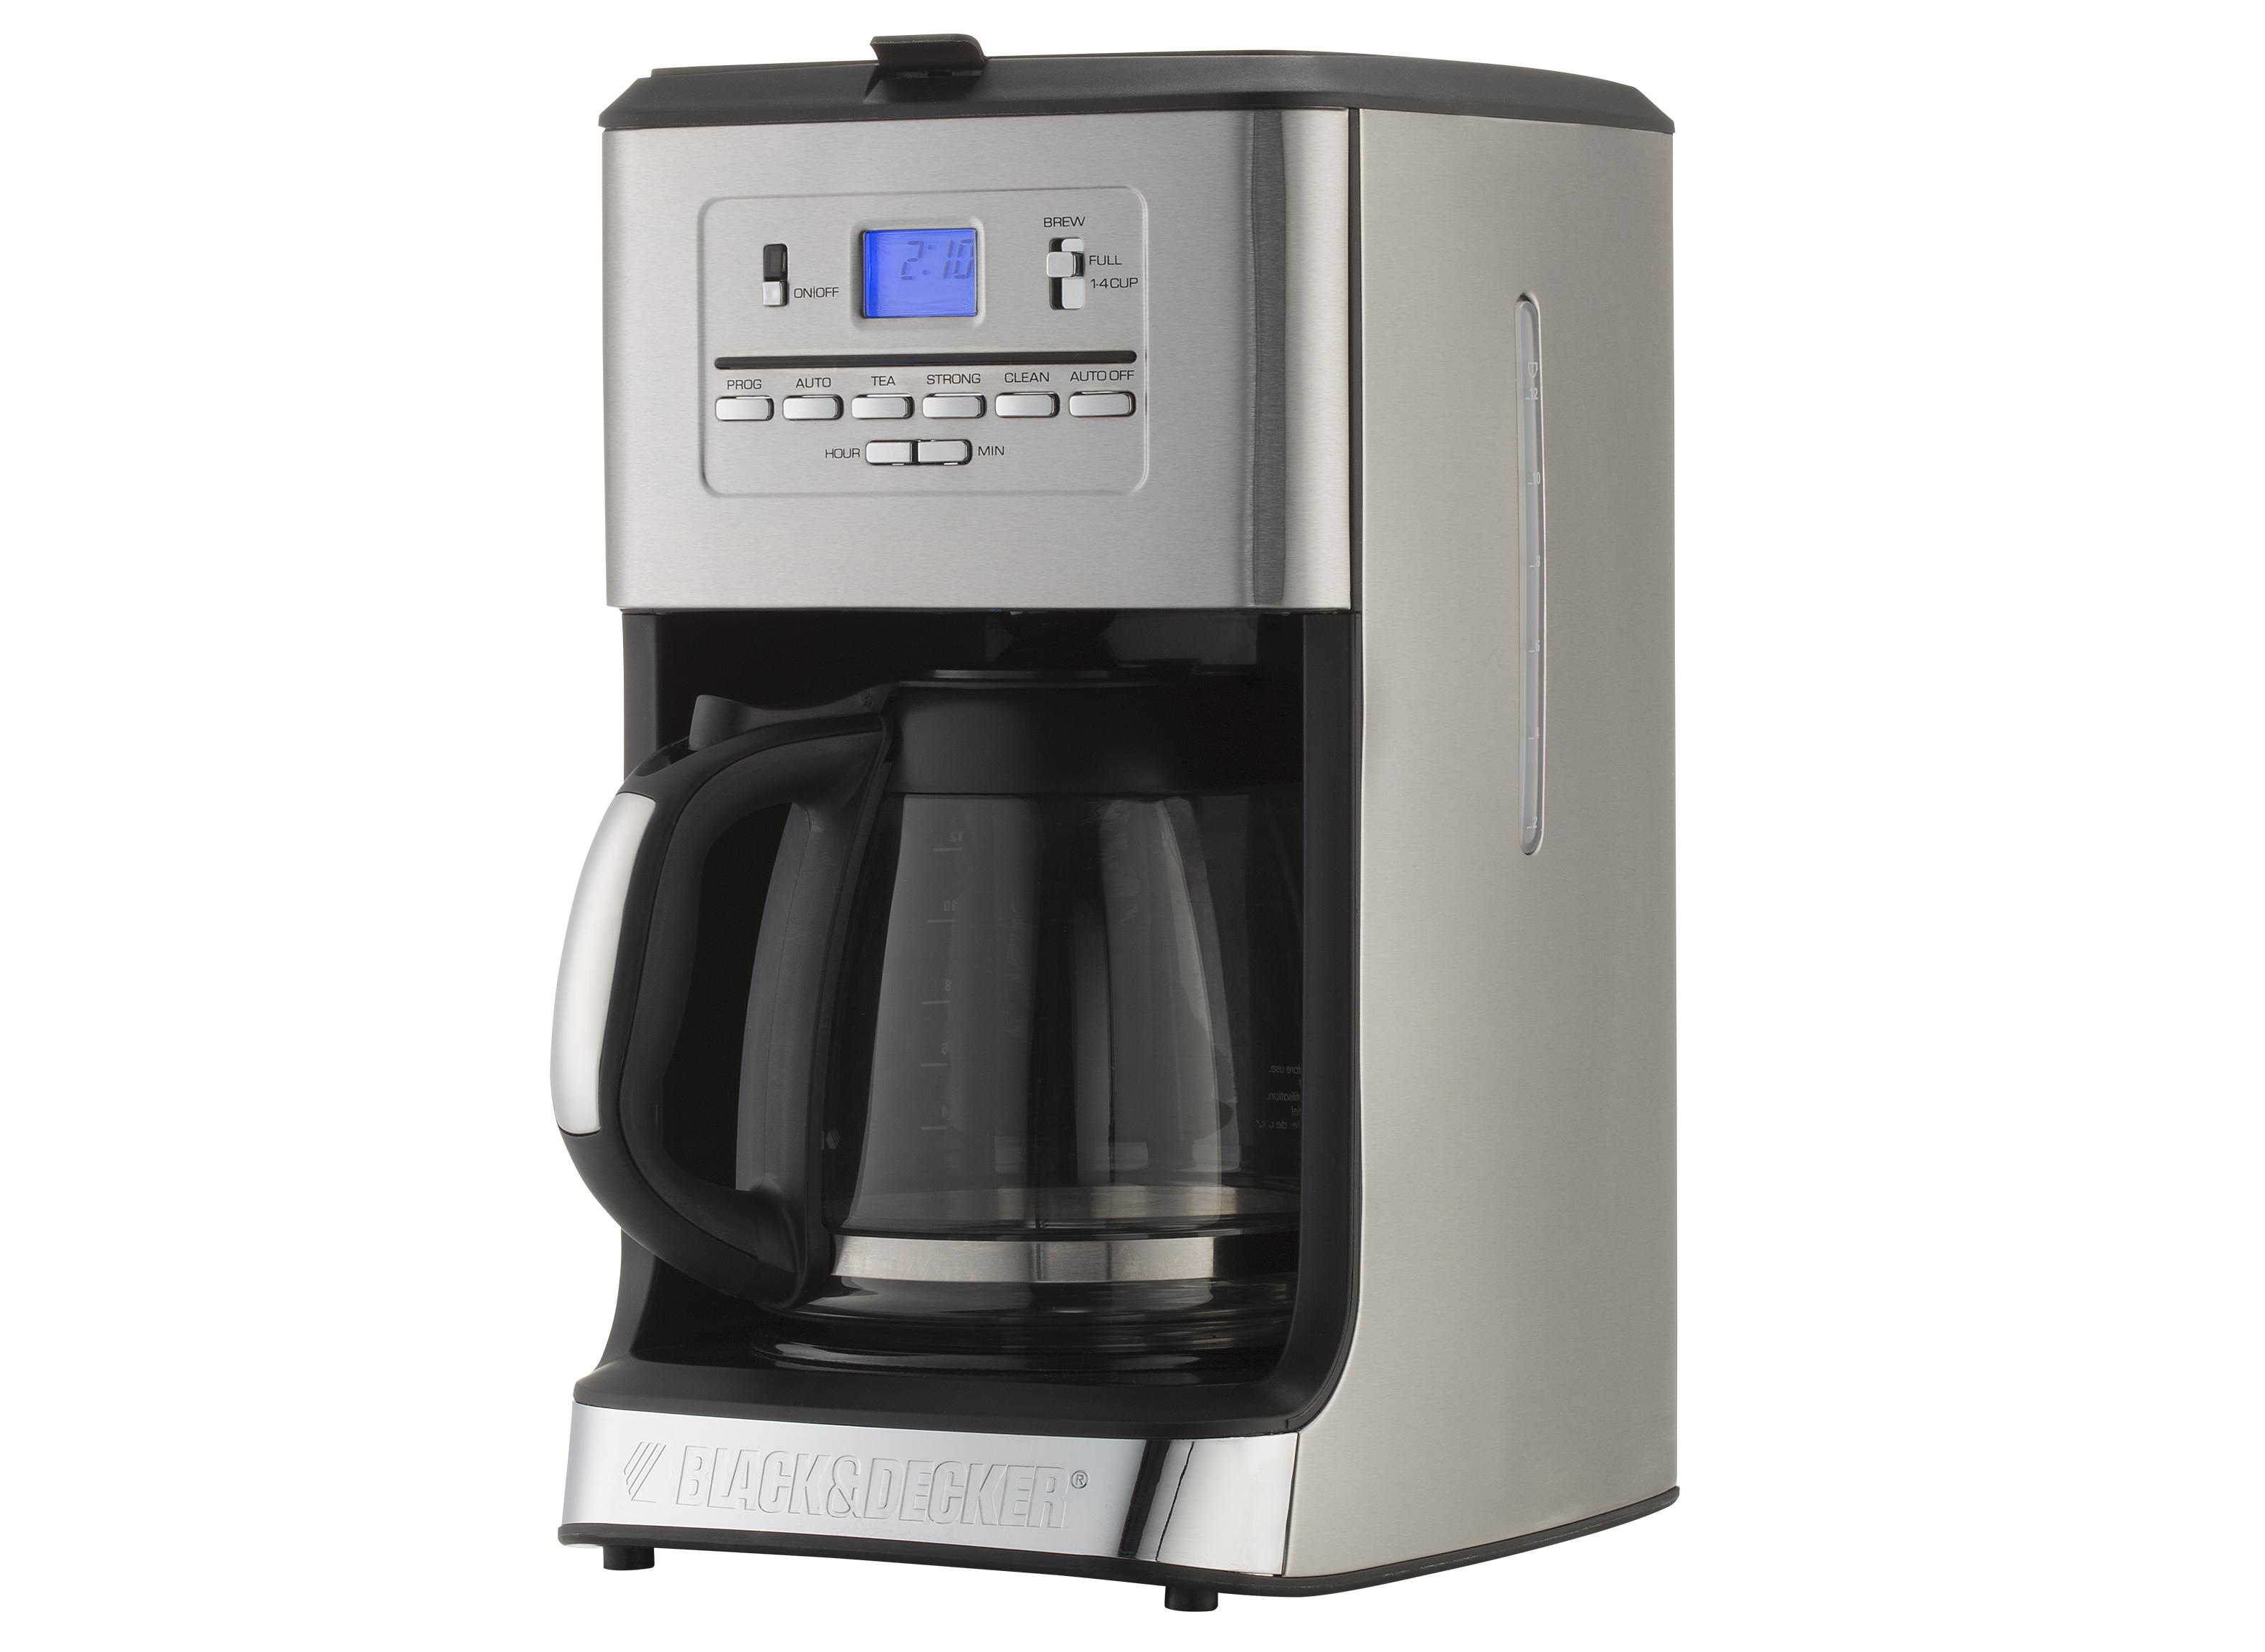 https://crdms.images.consumerreports.org/prod/products/cr/models/384634-coffeemakers-blackdecker-12cupteaandcoffeemakercm3005s.png